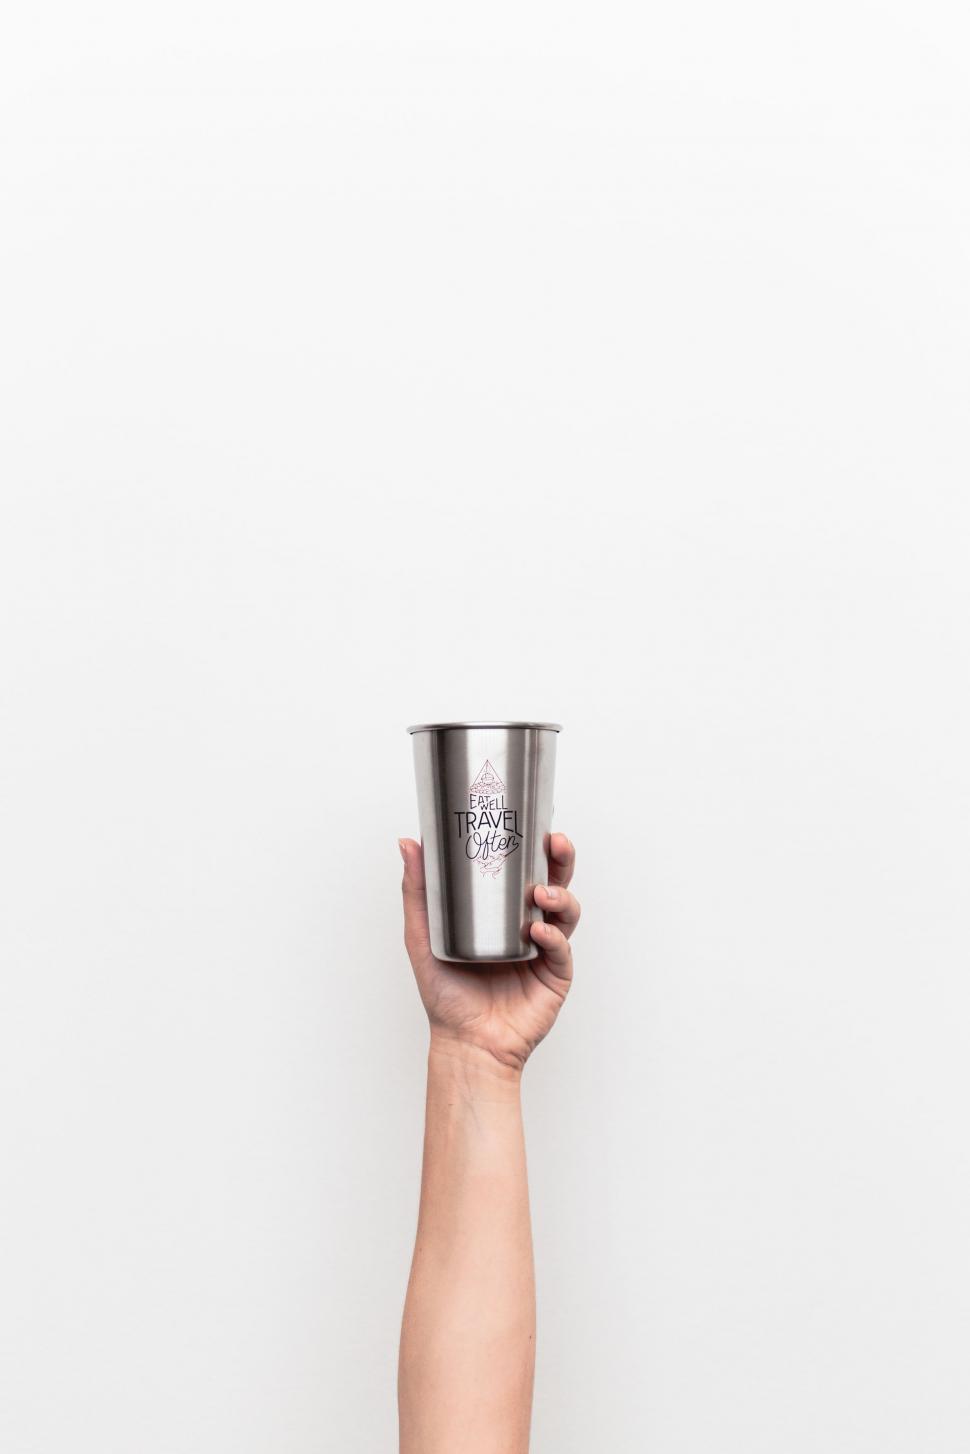 Free Image of Hand Holding Cup Up in the Air 